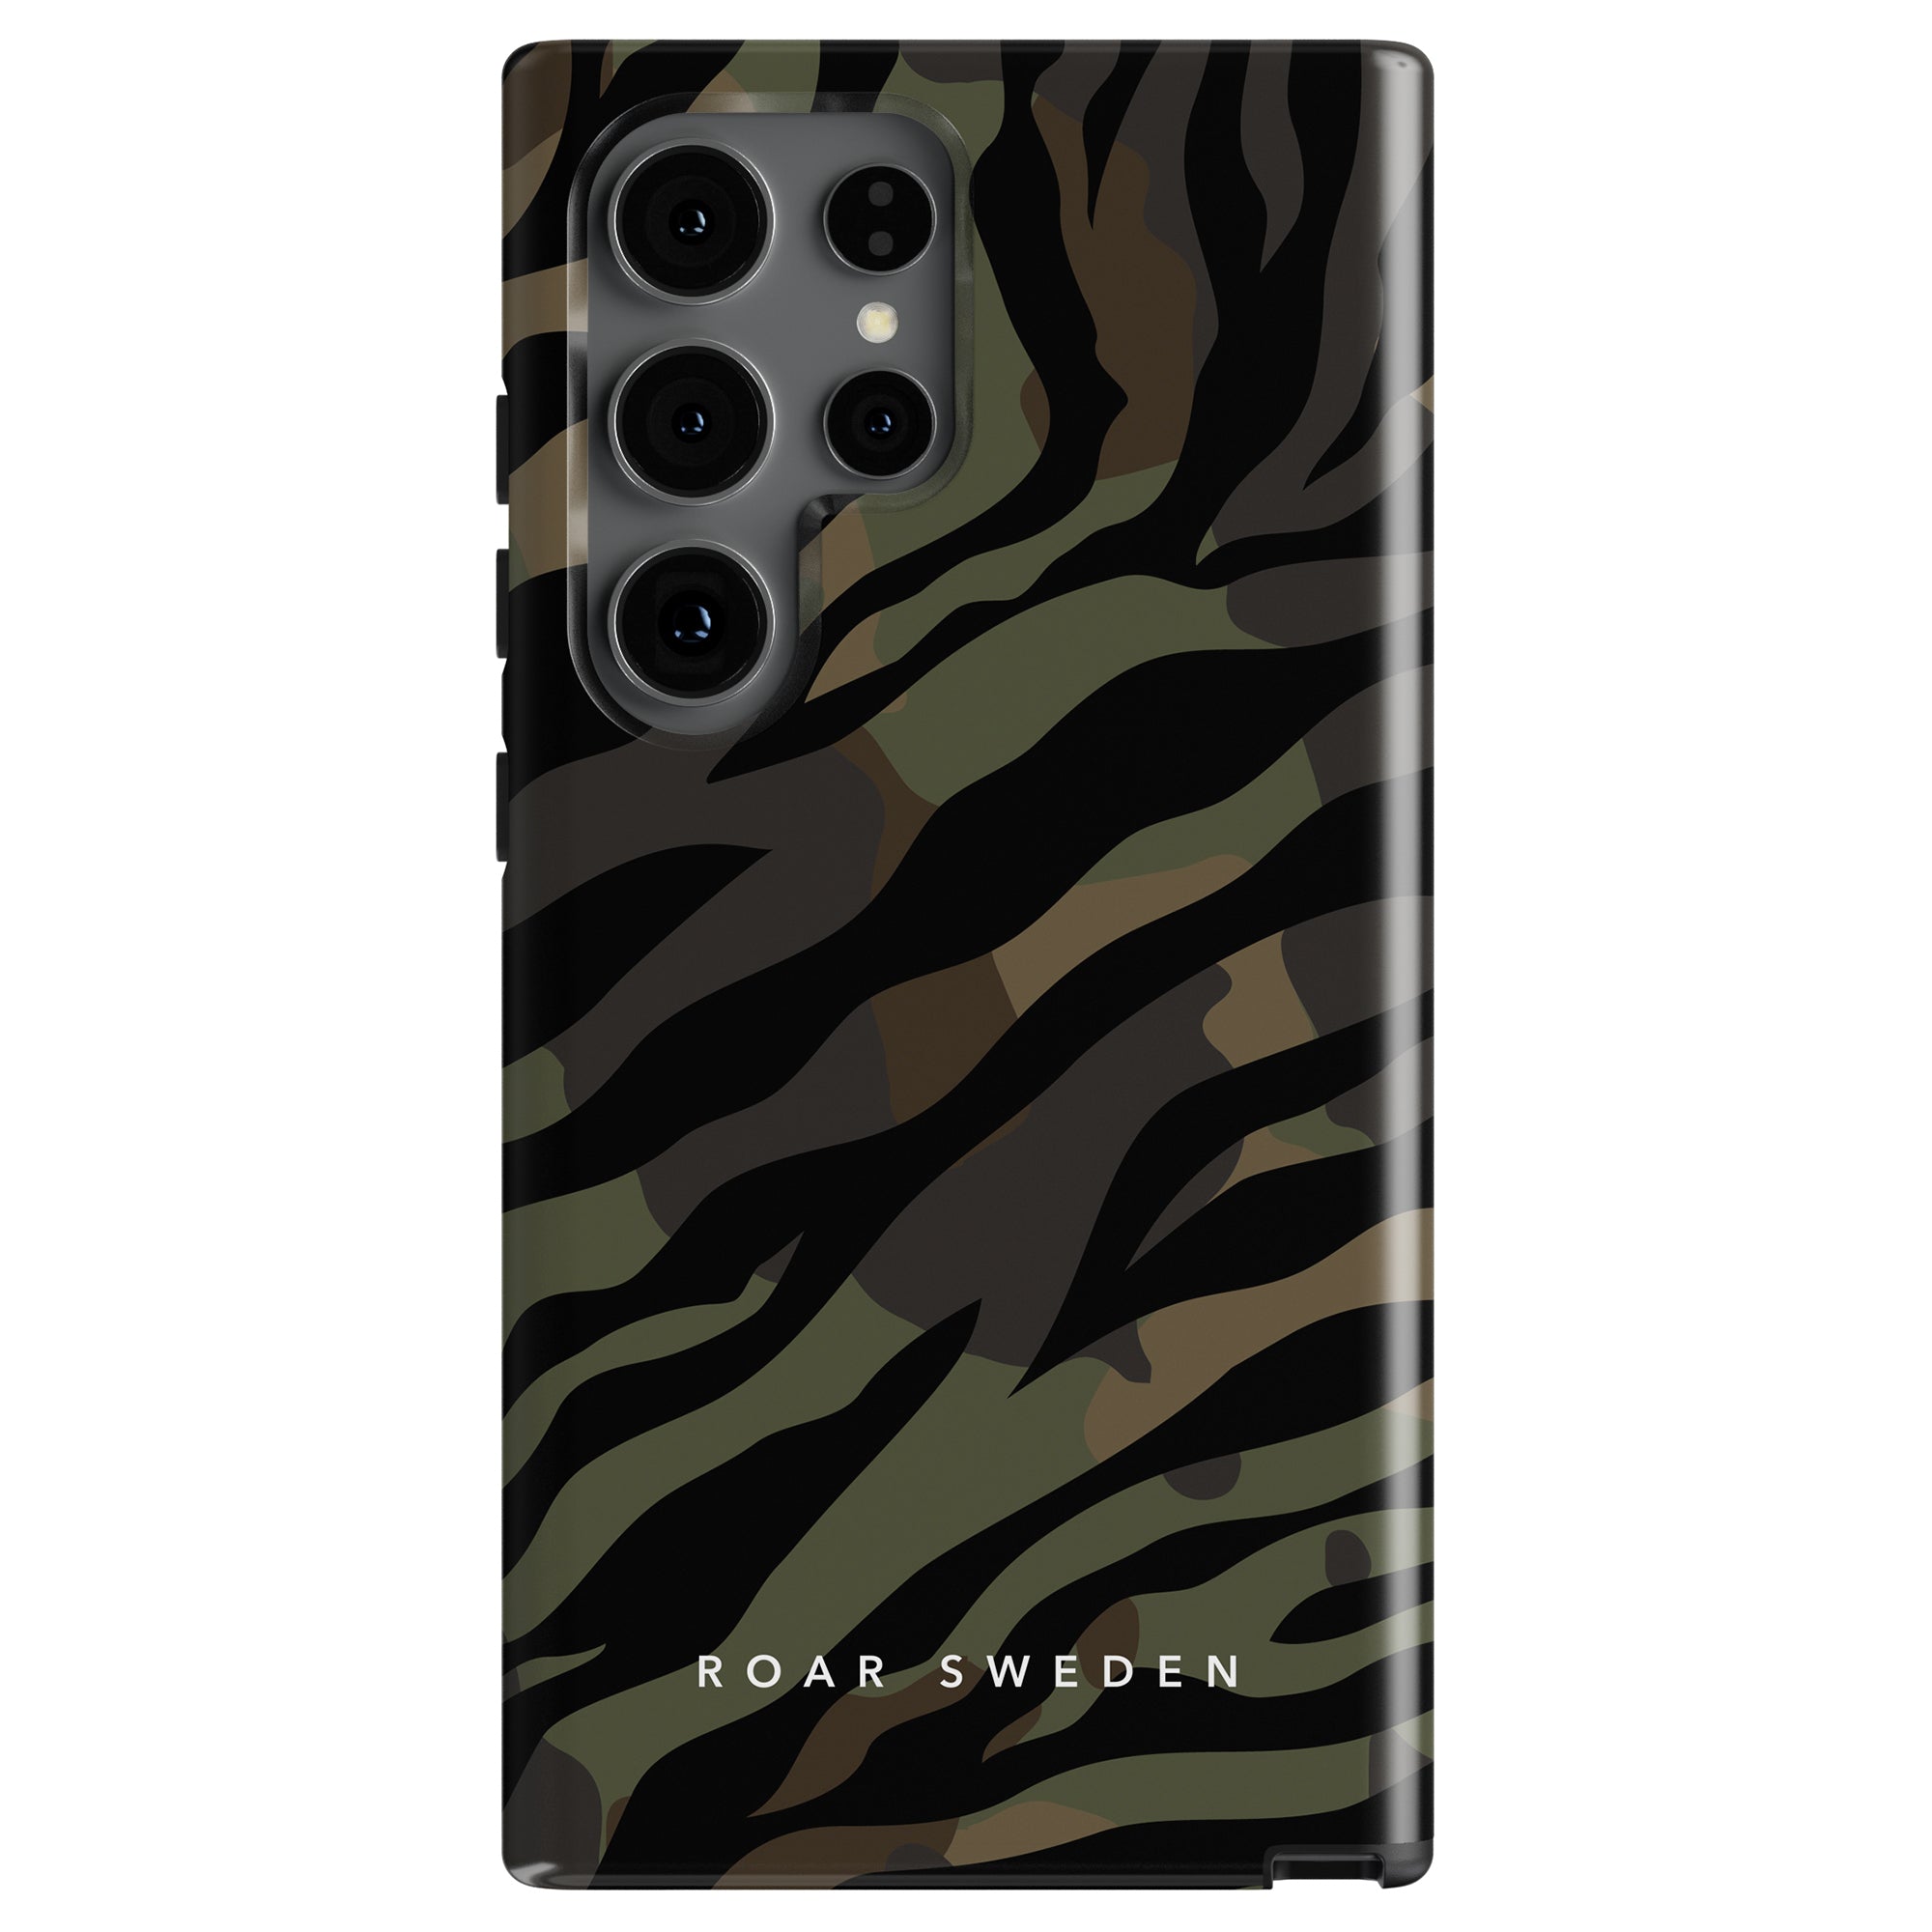 A smartphone with an Army - Tough Case featuring a green and black kamouflagemönster pattern, and the text "ROAR SWEDEN" at the bottom.